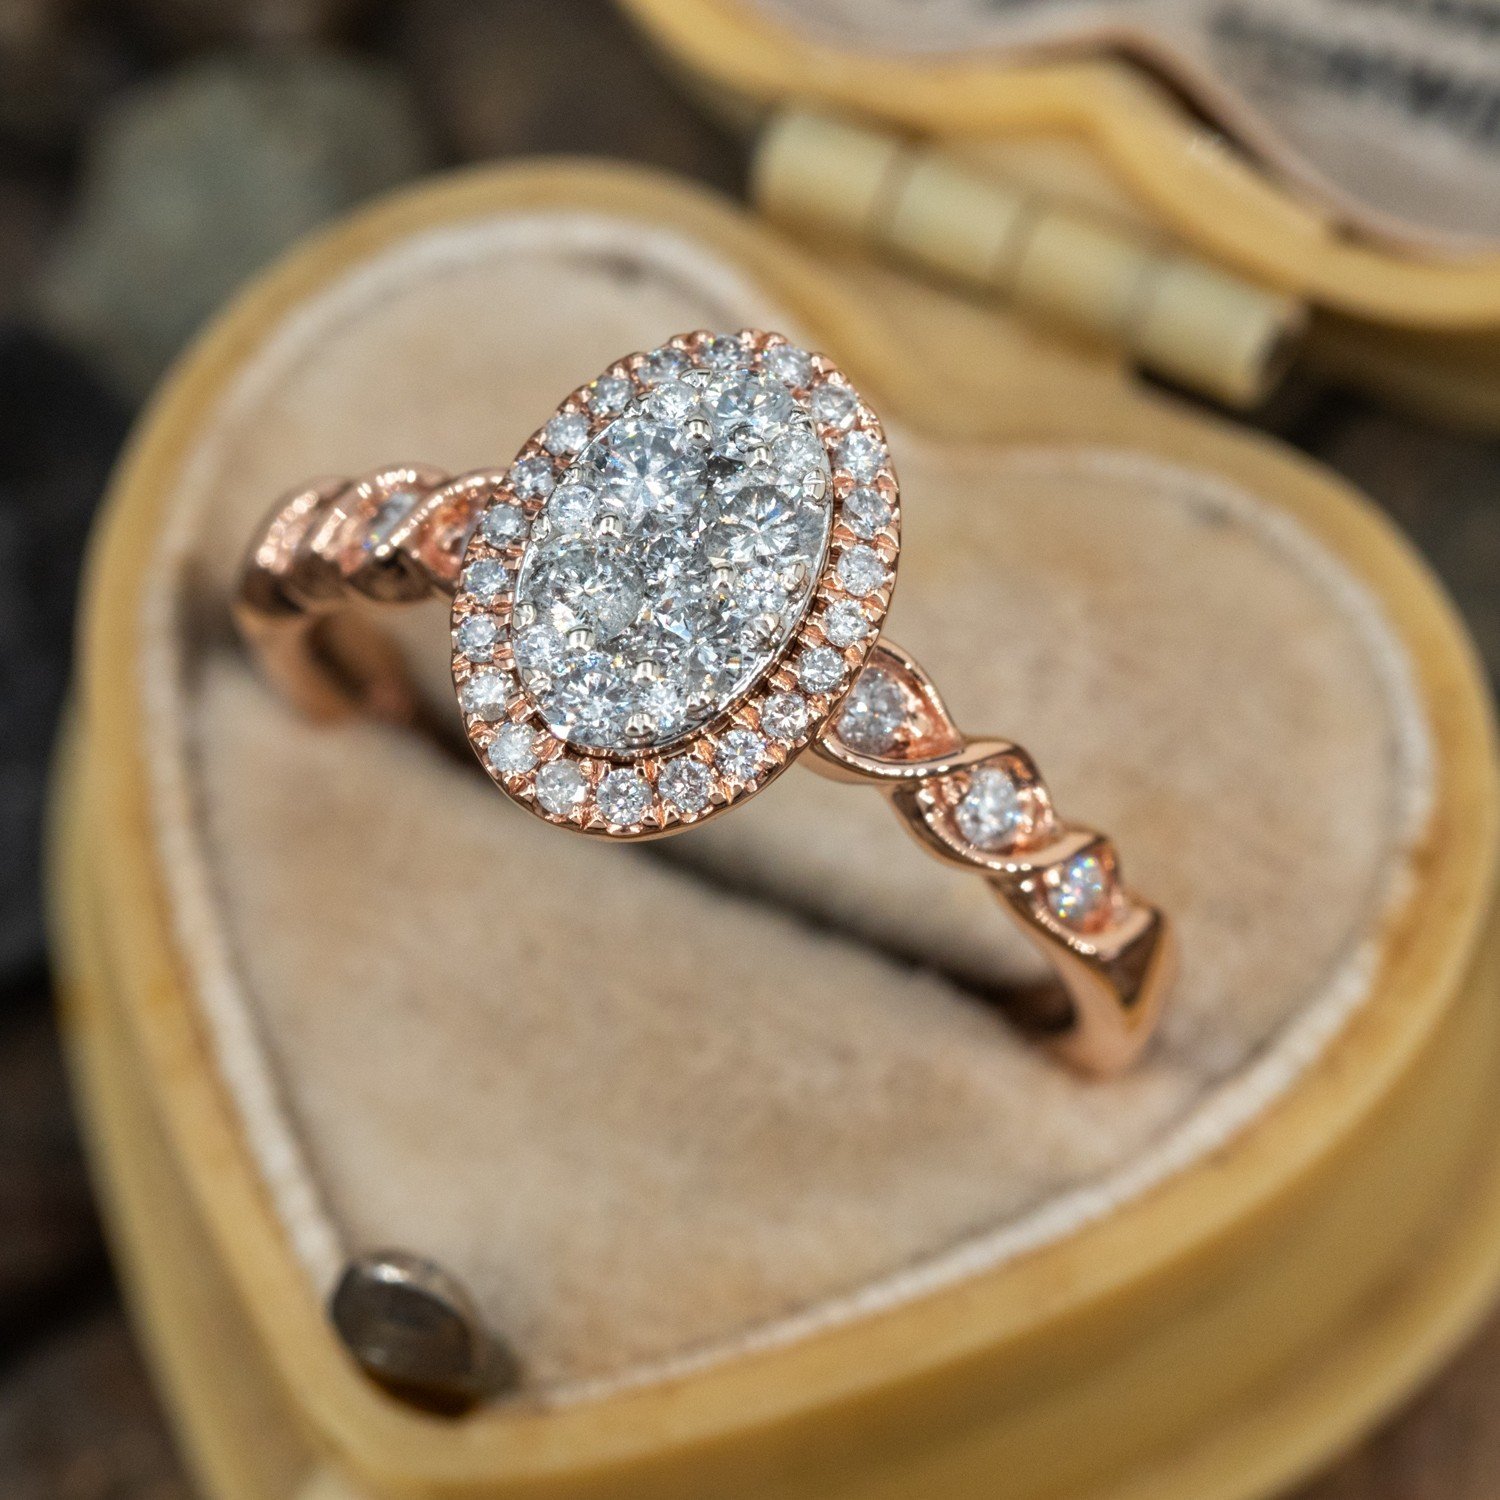 Classic 3-Stone Diamond Engagement Ring with Accents | Jewlr